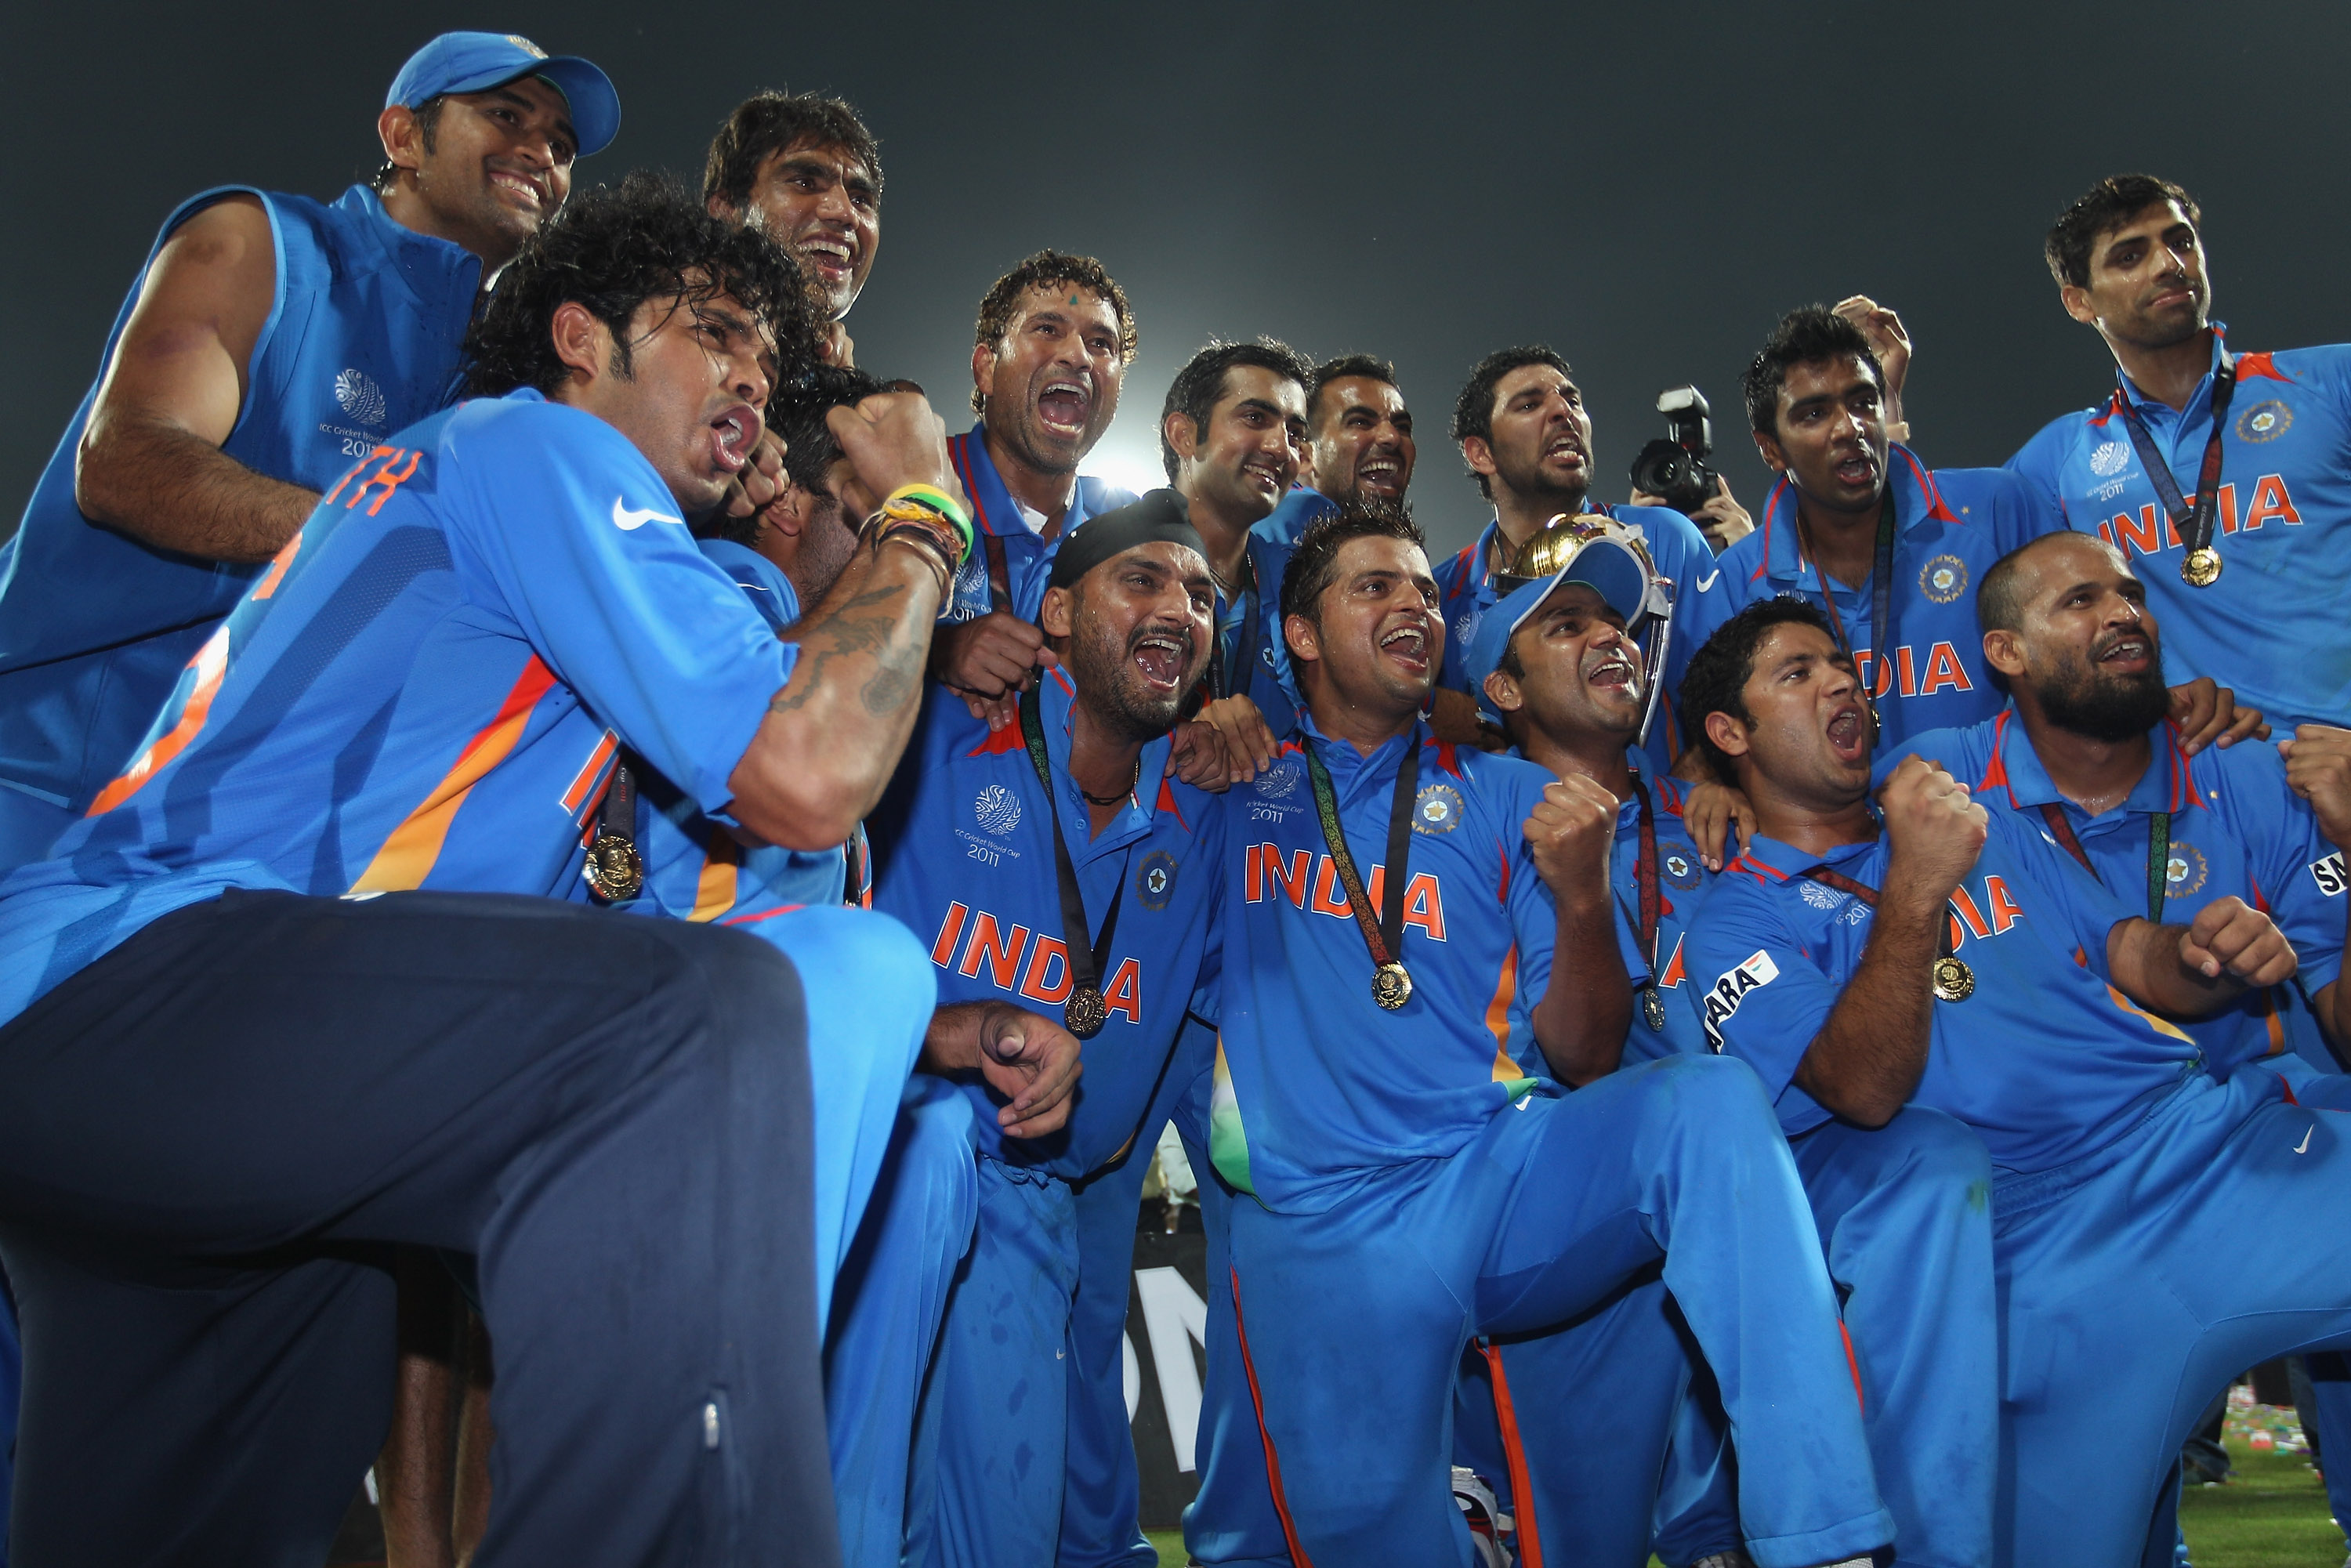 MUMBAI, INDIA - APRIL 02:  The India team celebrate their six wicket victory during the 2011 ICC World Cup Final between India and Sri Lanka at Wankhede Stadium on April 2, 2011 in Mumbai, India.  (Photo by Michael Steele/Getty Images)